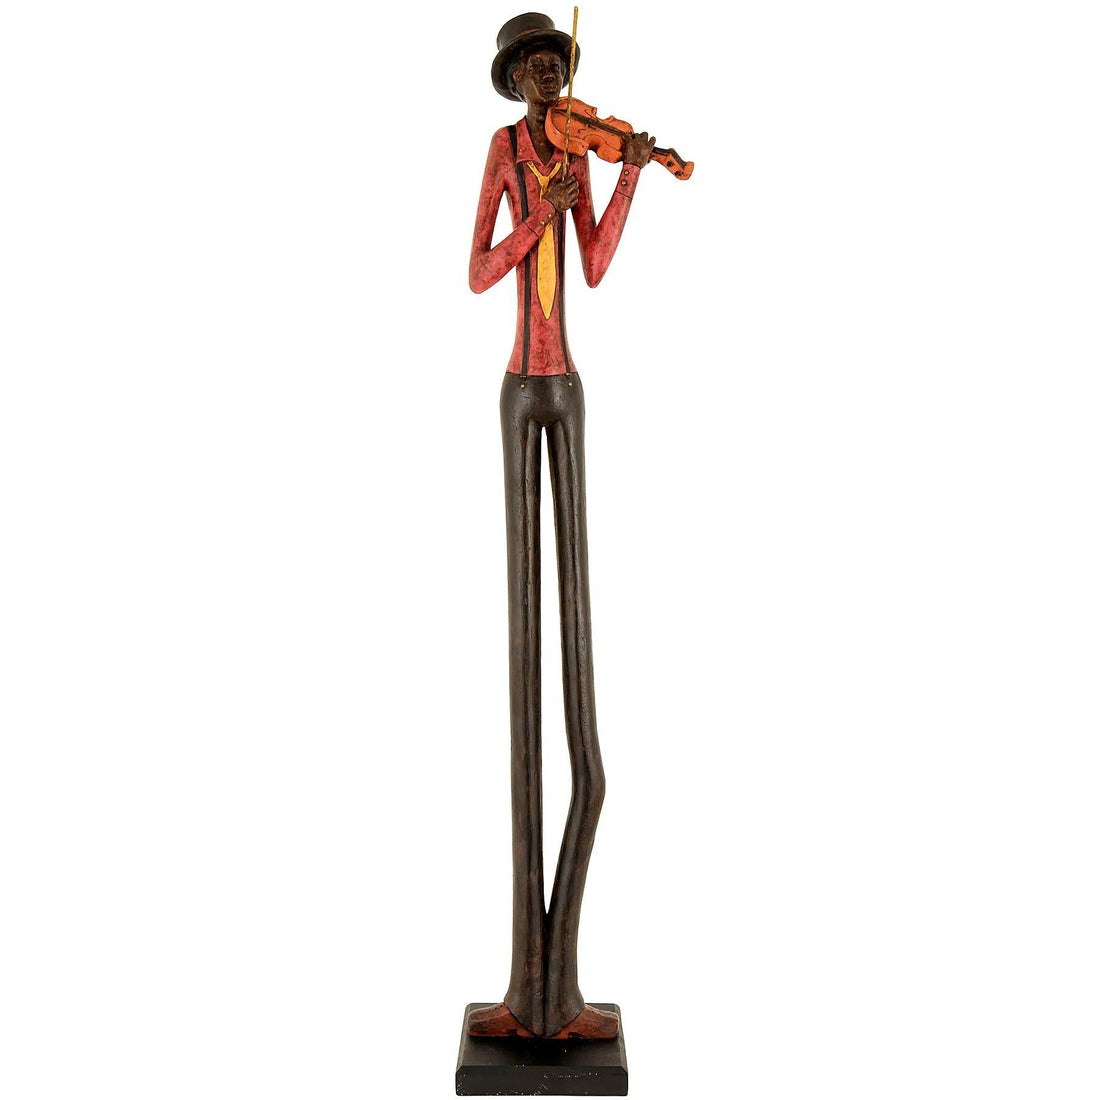 Standing Jazz Band Violinist - £49.95 - Gifts & Accessories > Ornaments > People Figurines 